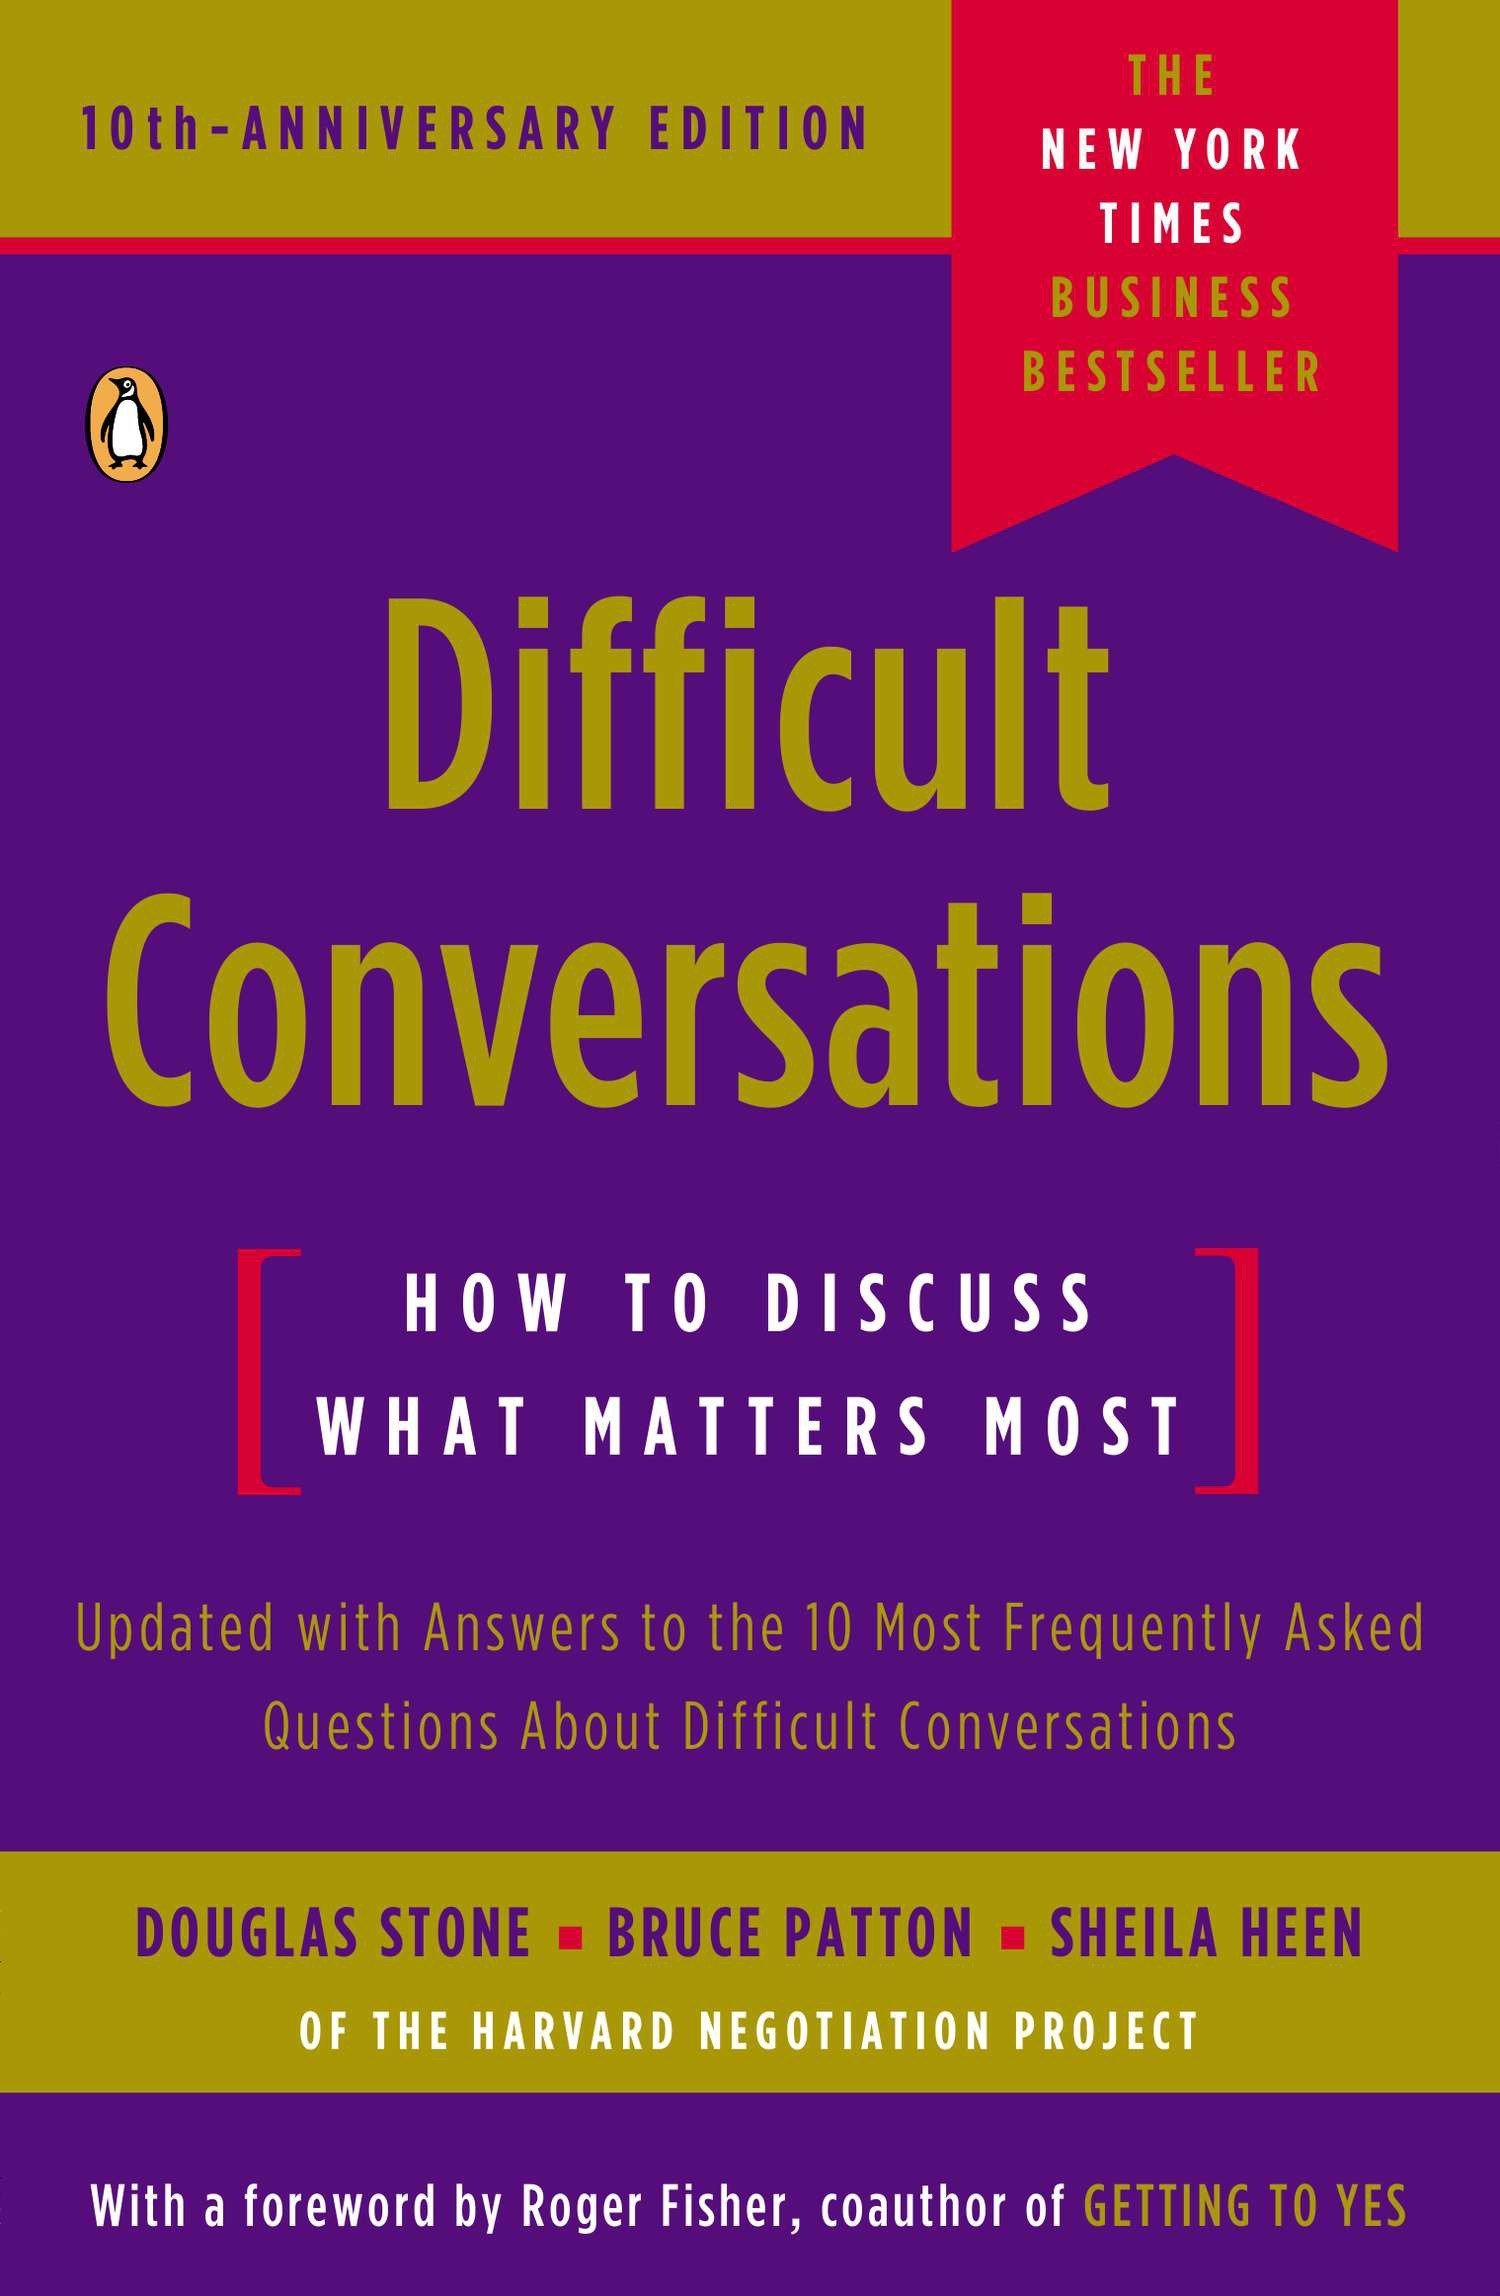 Book image of Difficult conversations..